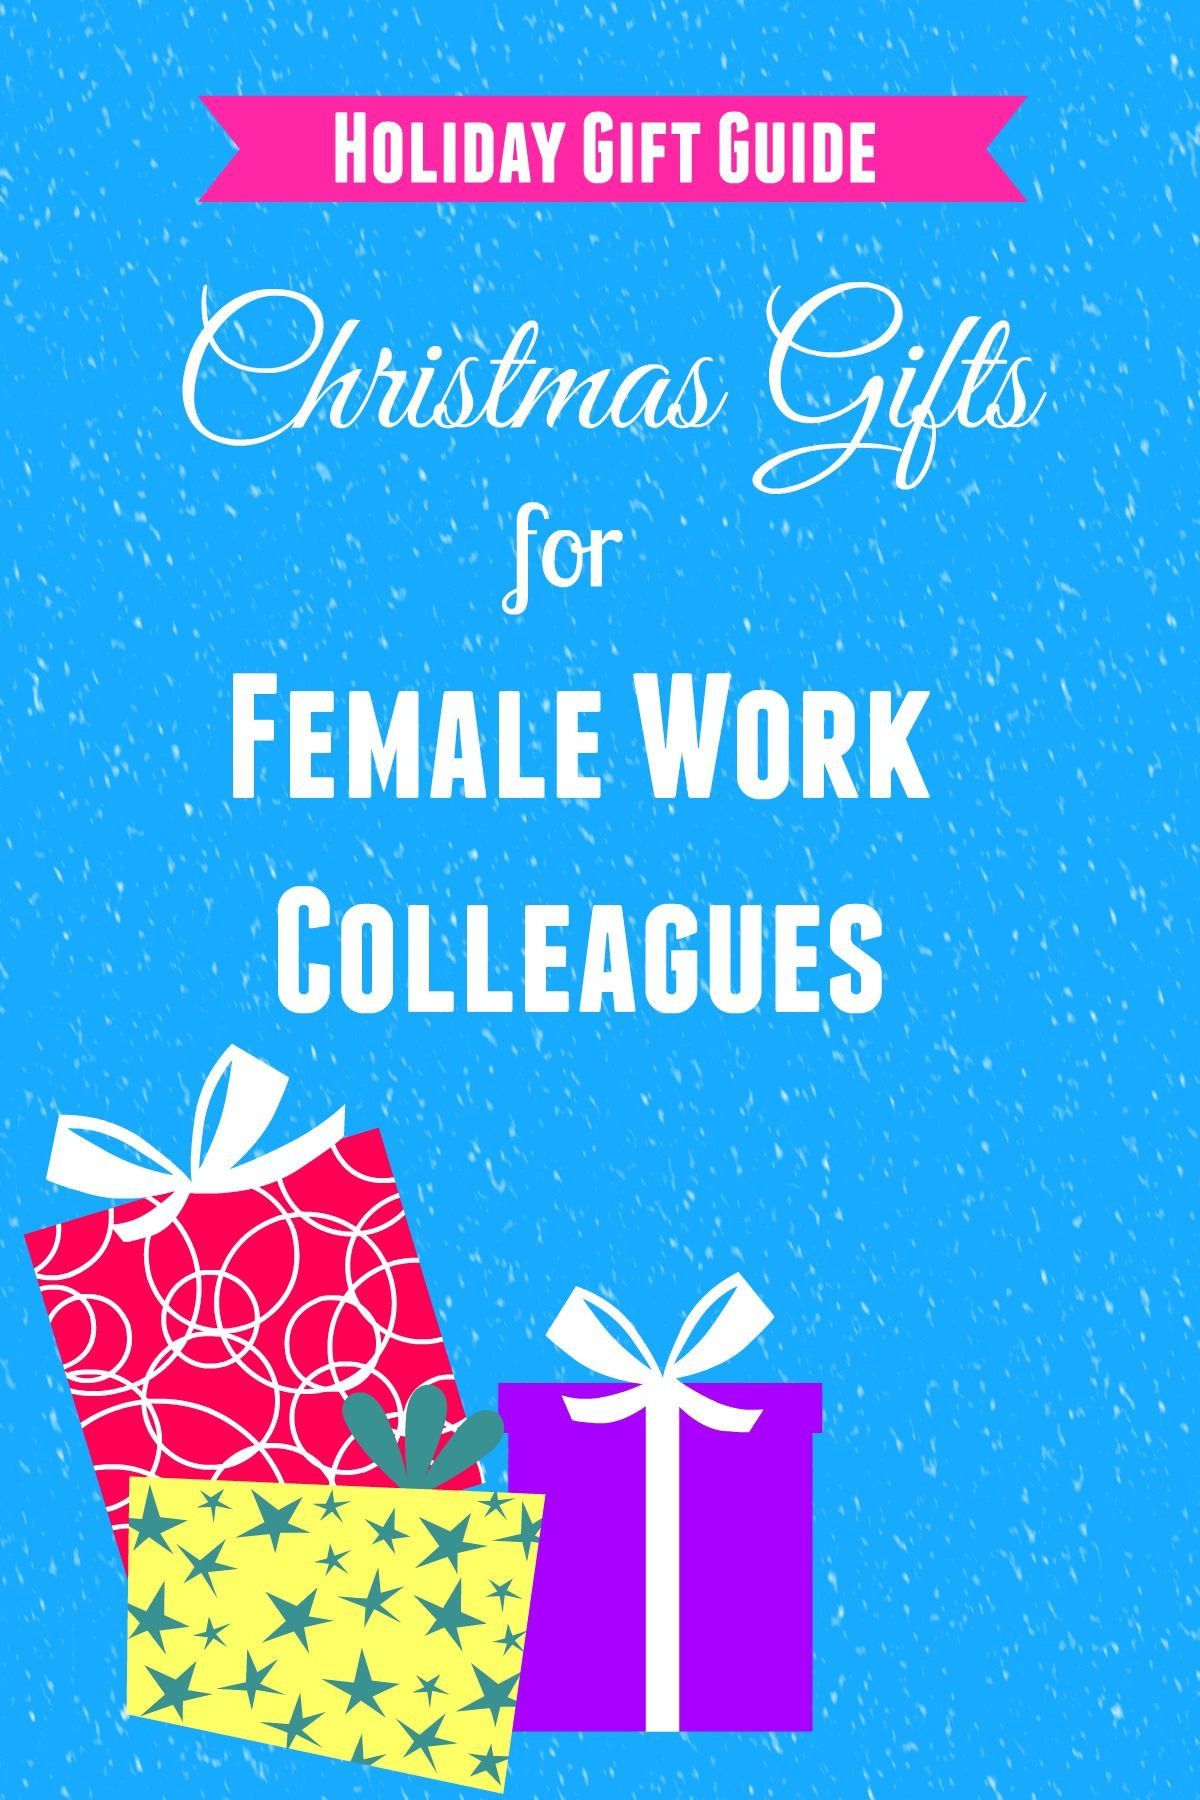 Holiday Gift Ideas For Female Coworkers
 Christmas ts for female colleagues